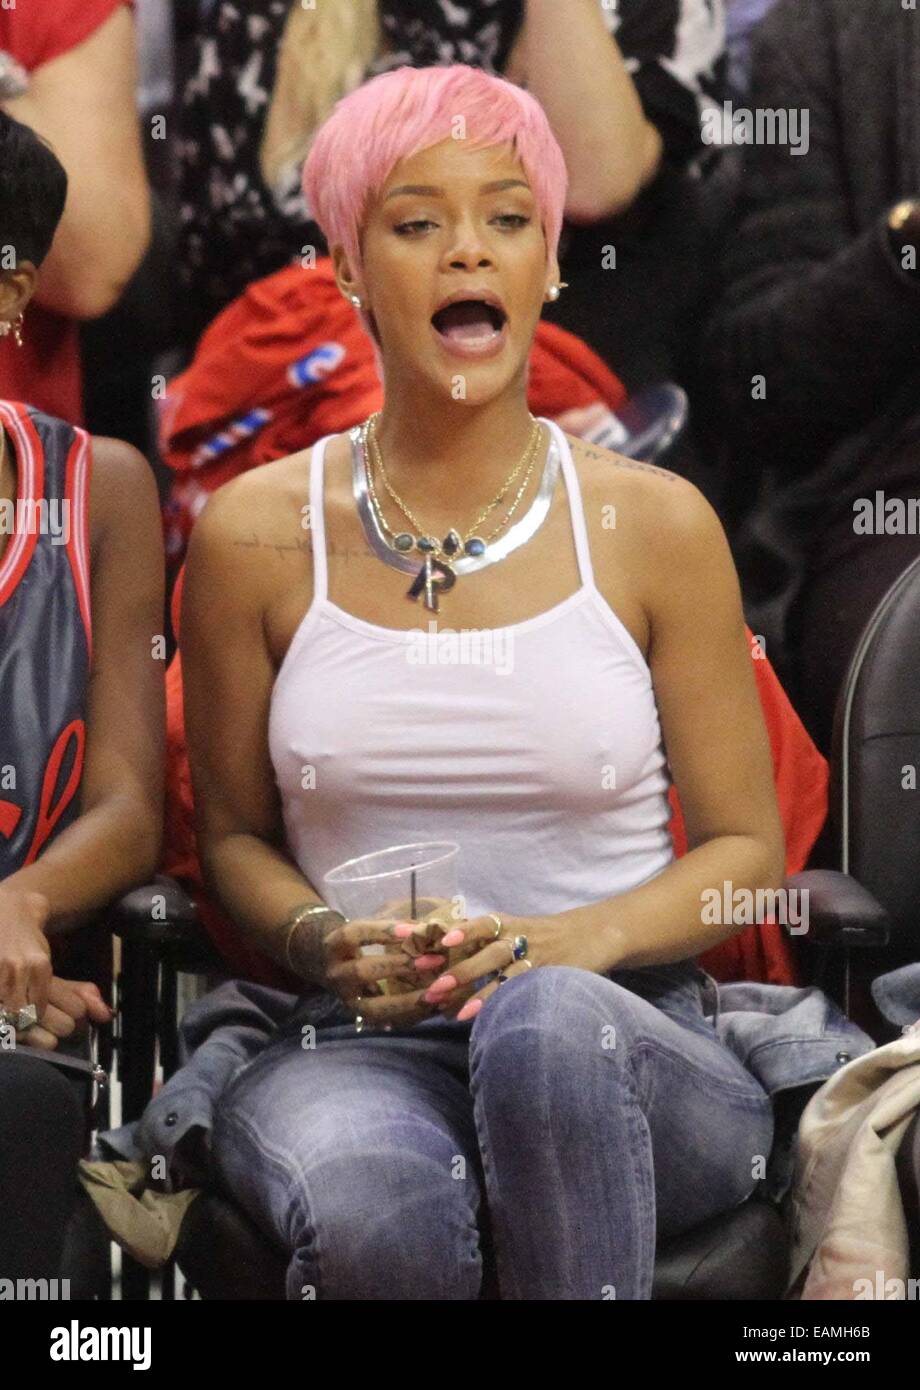 https://c8.alamy.com/comp/EAMH6B/rihanna-sports-a-new-pink-hairstyle-as-she-and-a-friend-cheer-on-the-EAMH6B.jpg